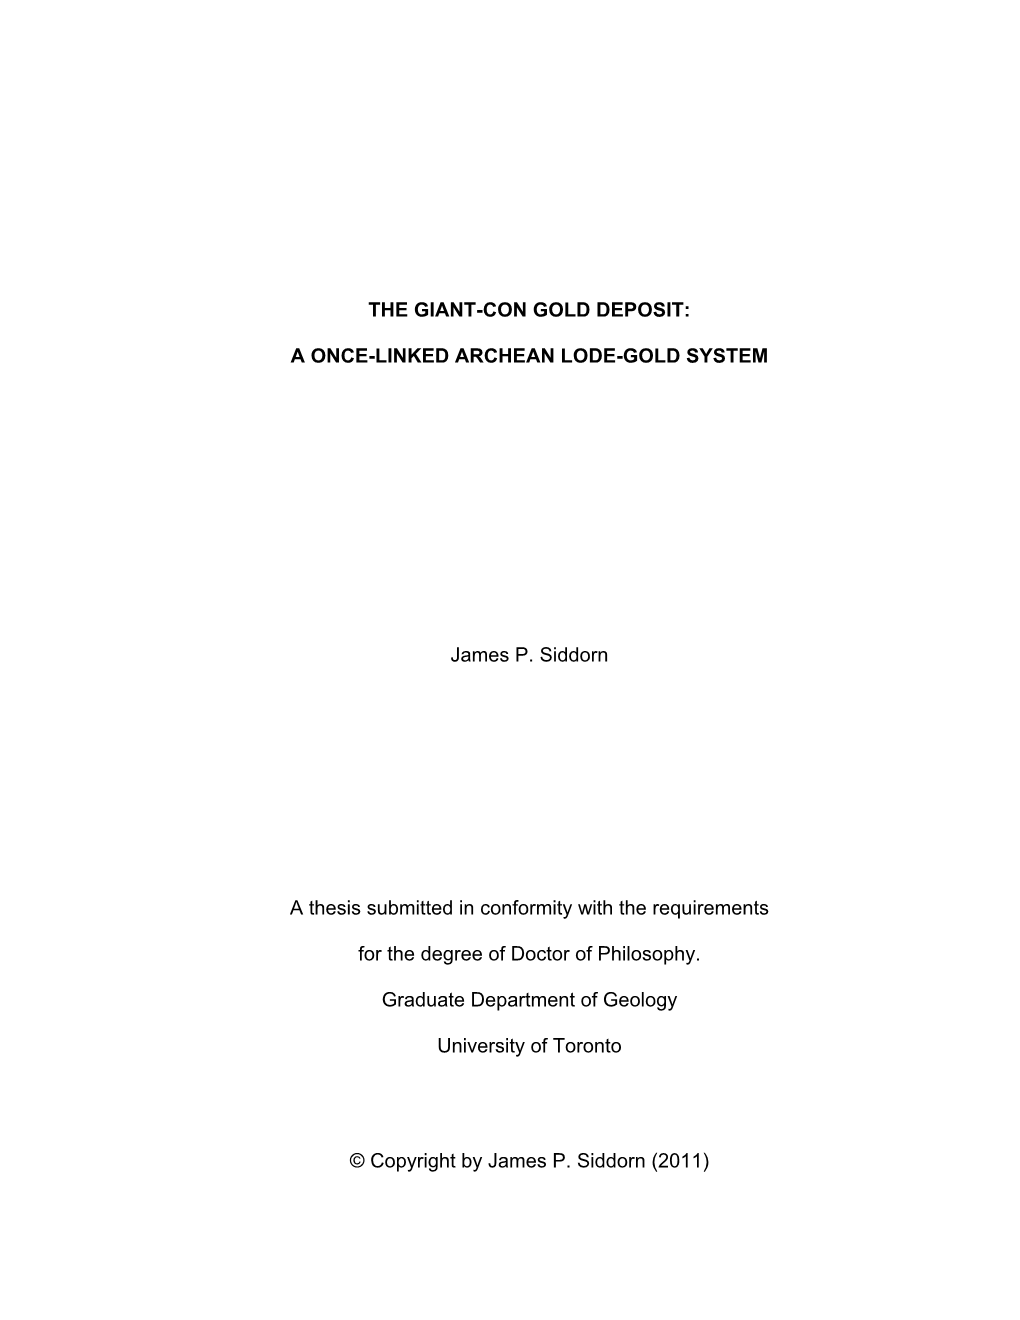 THE GIANT-CON GOLD DEPOSIT: a ONCE-LINKED ARCHEAN LODE-GOLD SYSTEM James P. Siddorn a Thesis Submitted in Conformity with the R